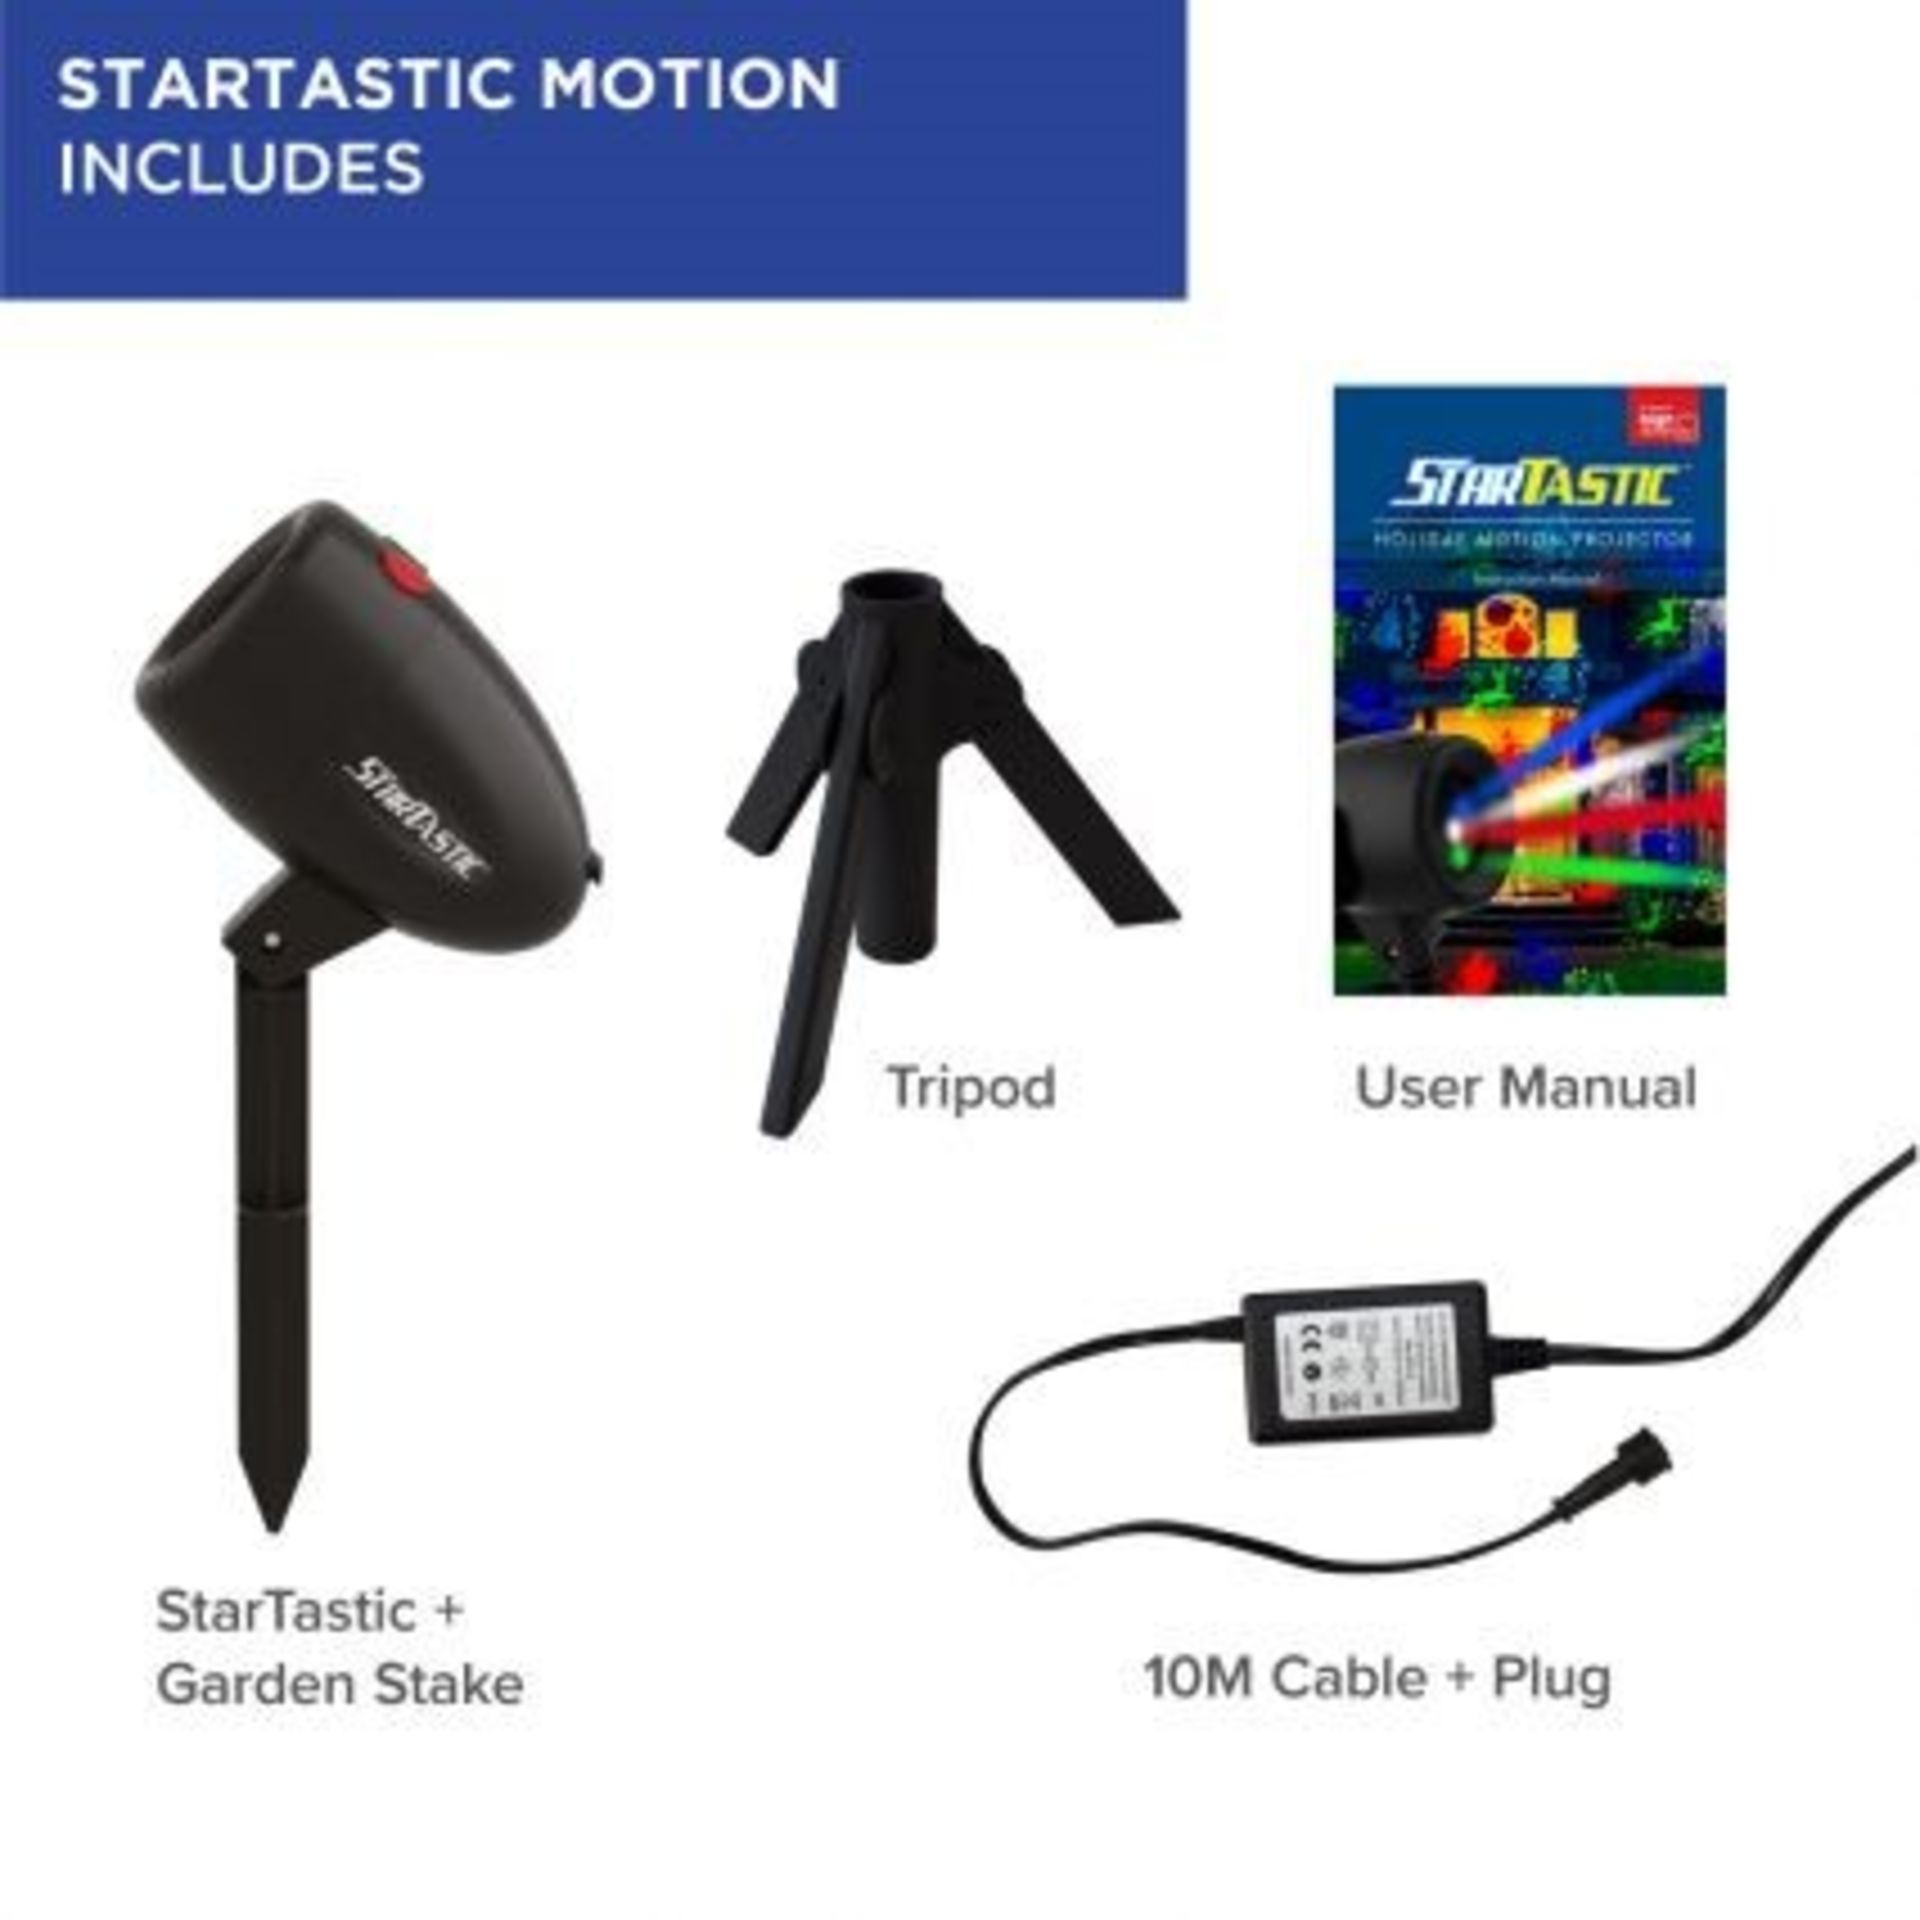 | 2X | BOX OF 6 STARTASTIC ACTION LASER PROJECTORS WITH 6 LASER MODES | NEW AND BOXED | SKU